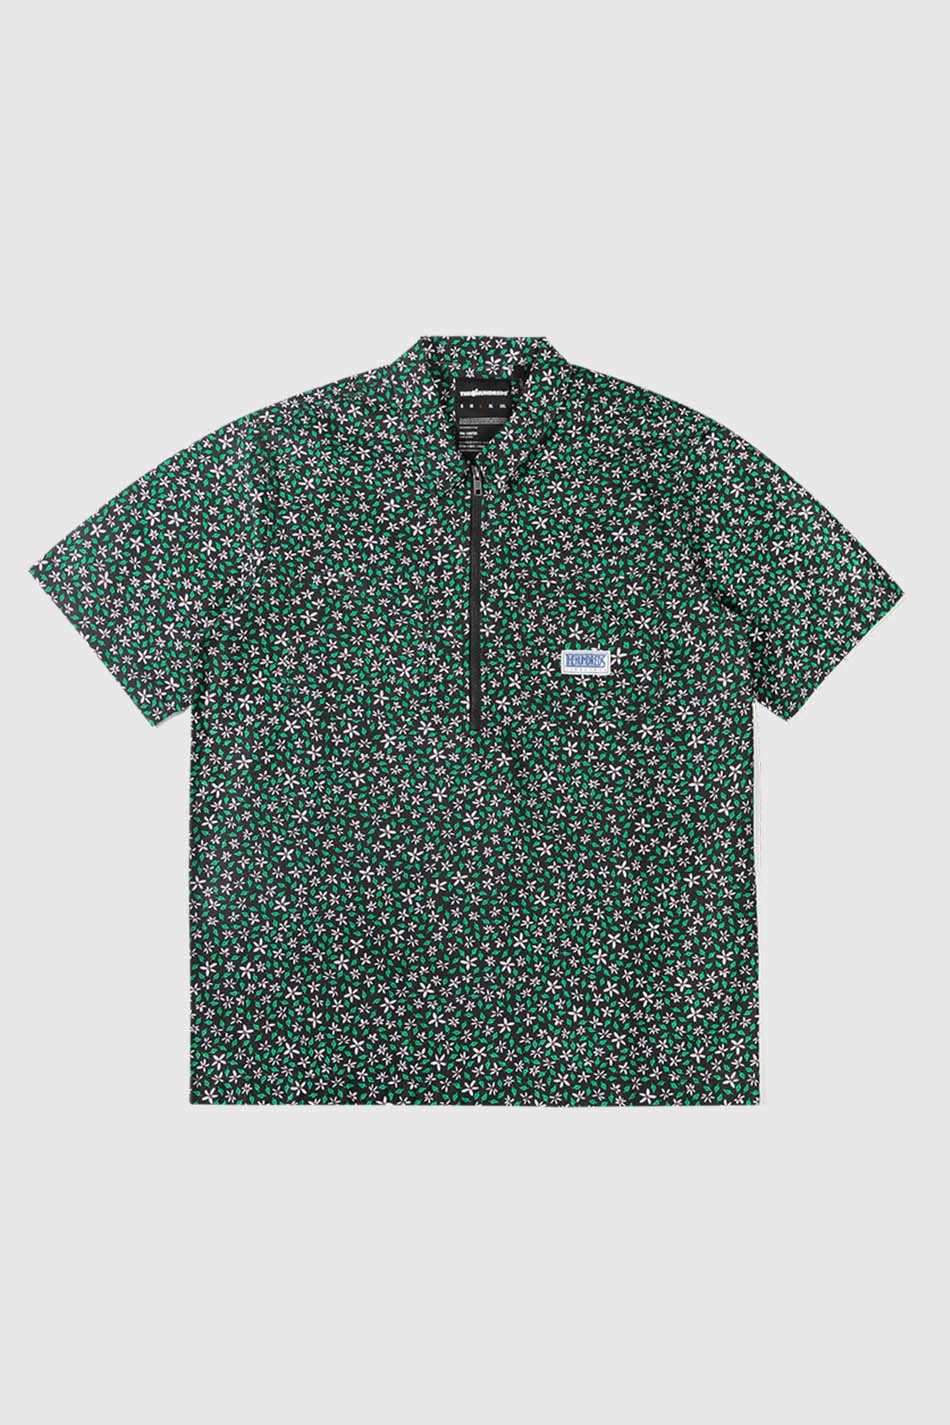 Chemise The Hundreds Flores